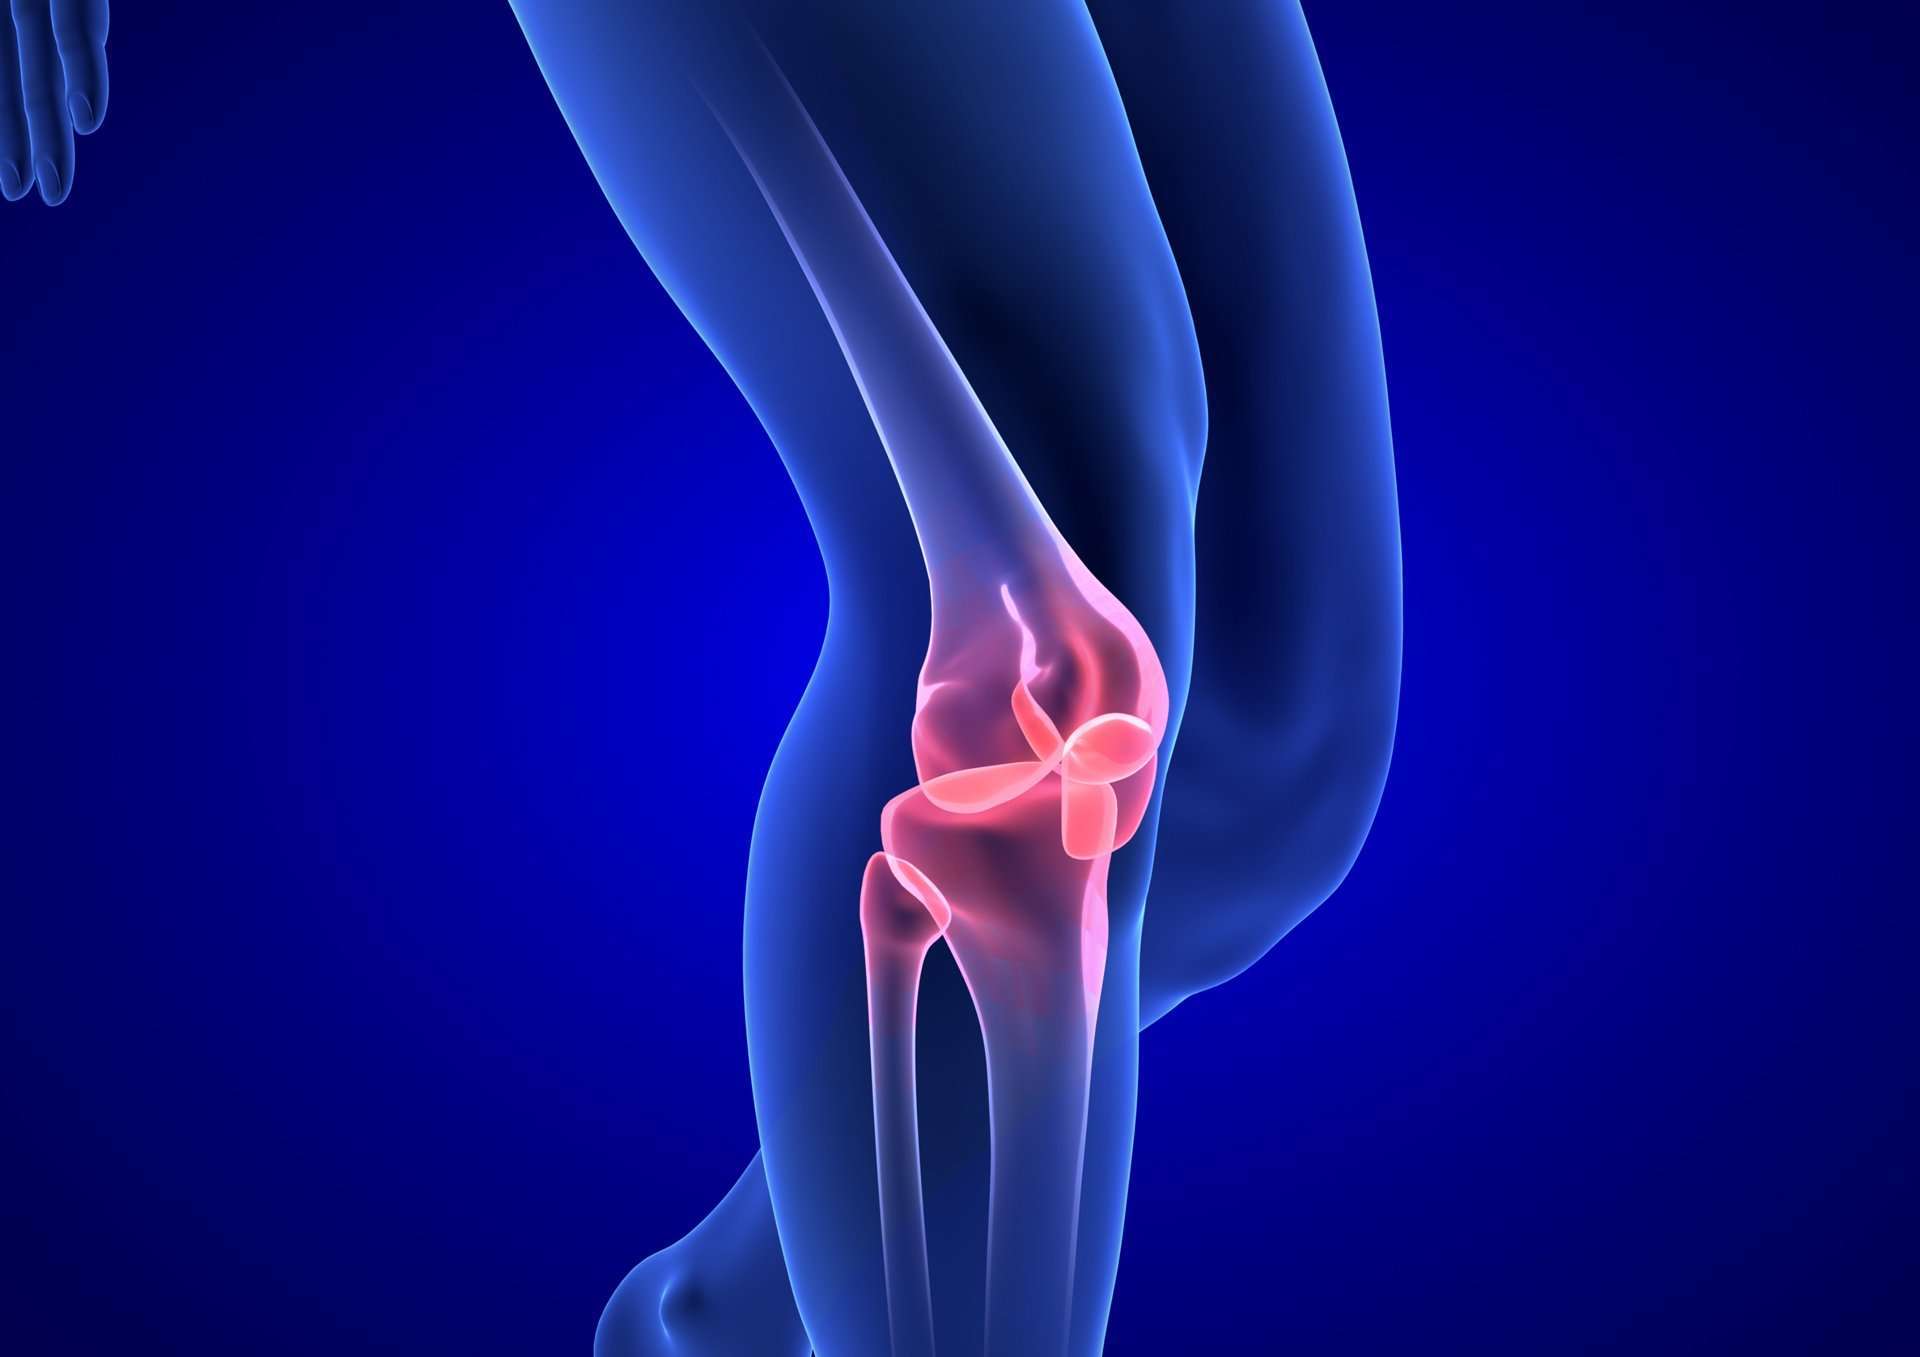 Dealing with knee pain